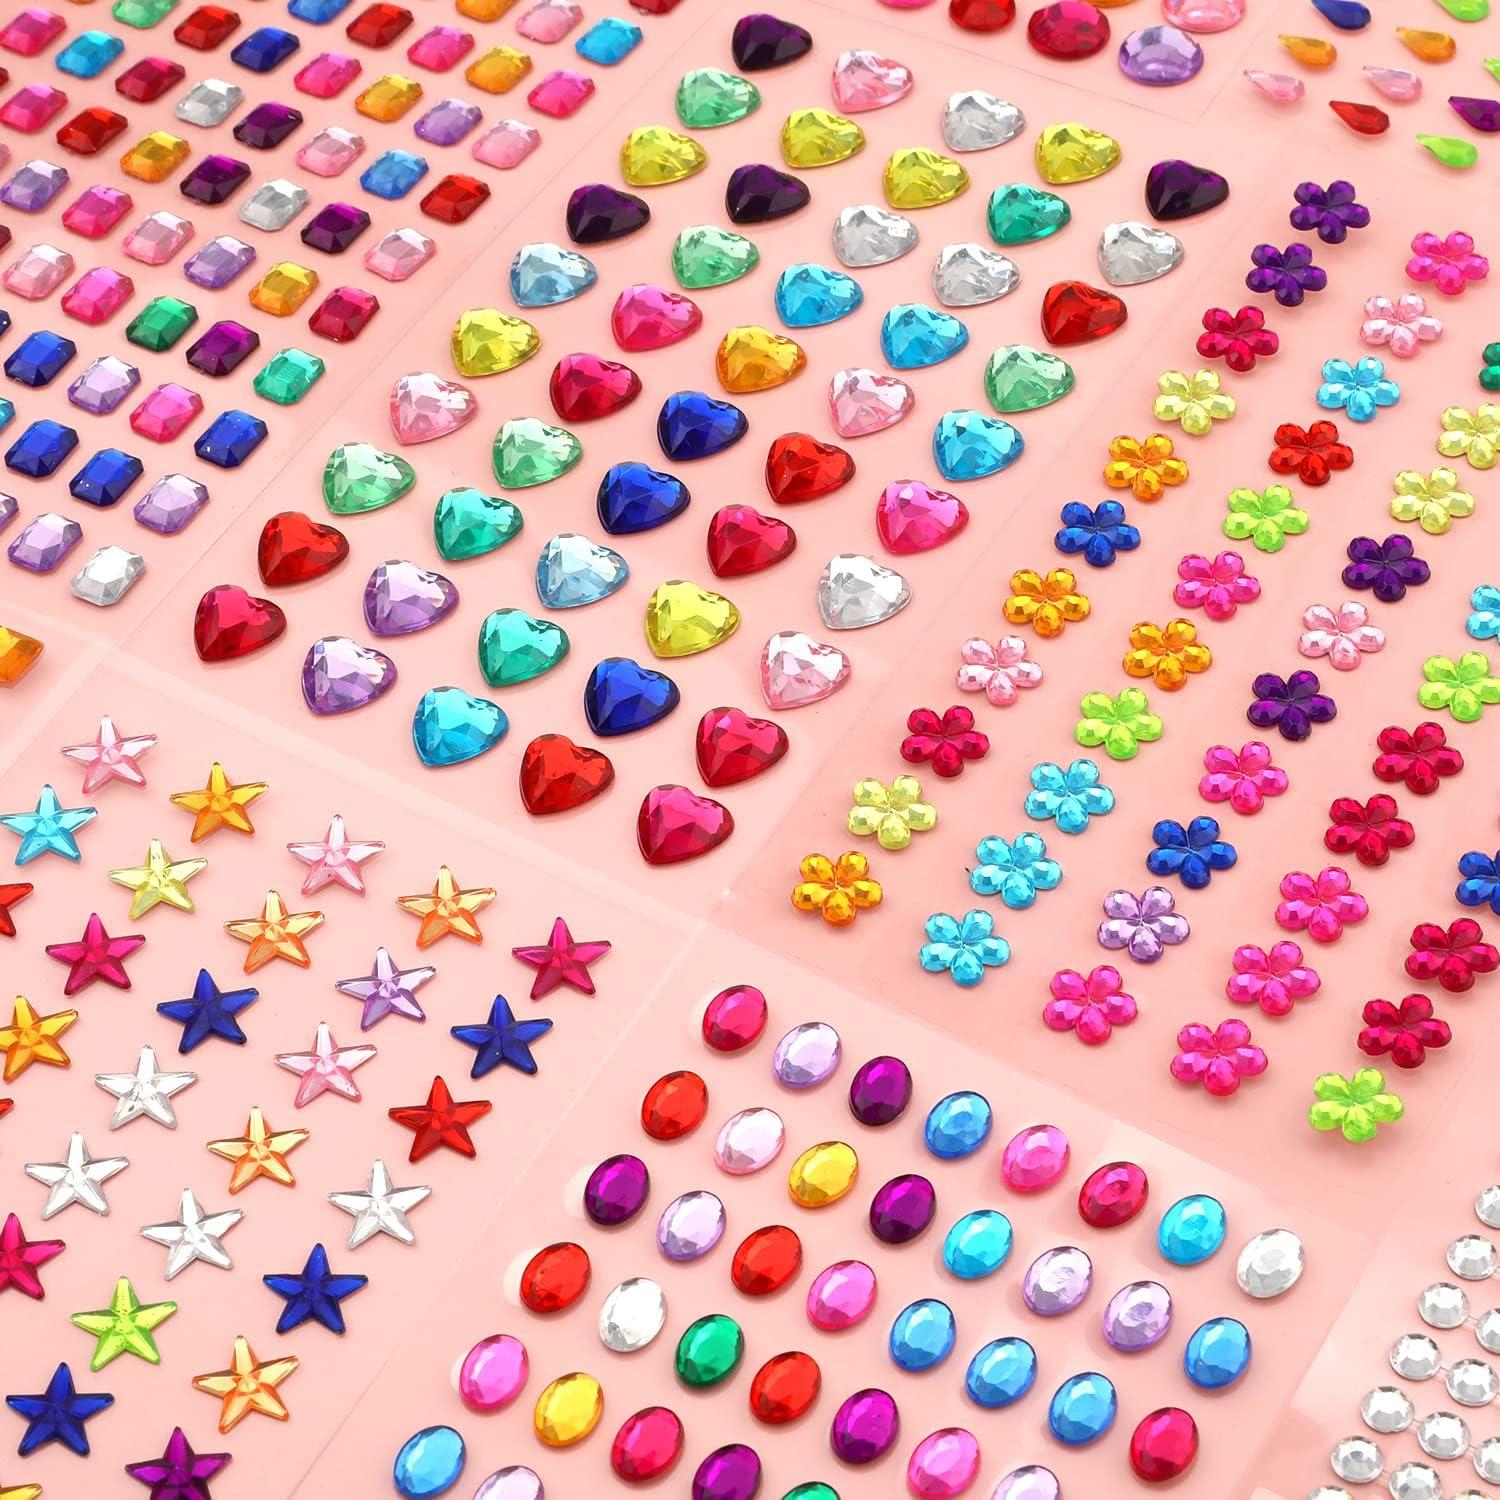 2310 PCS Self Adhesive Rhinestone Gem Stickers for Face Nail Body Makeup  Festival 4 Size 14 Sheets Bling Jewels Stickers for Kids DIY Craft Card  Decorations